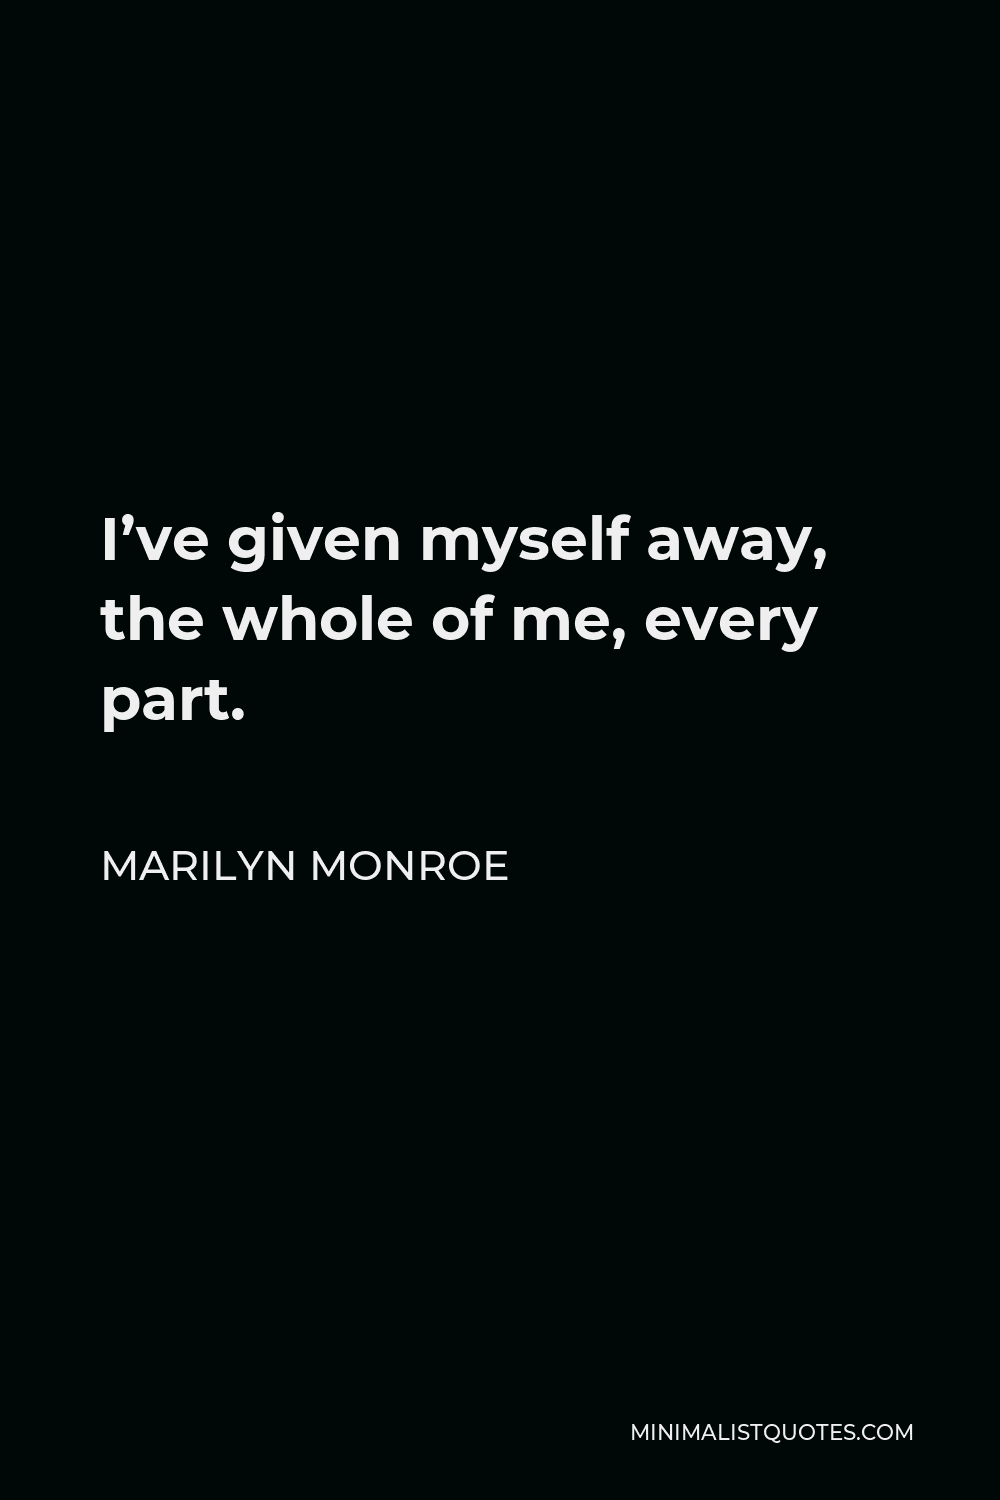 Marilyn Monroe Quote - I’ve given myself away, the whole of me, every part.